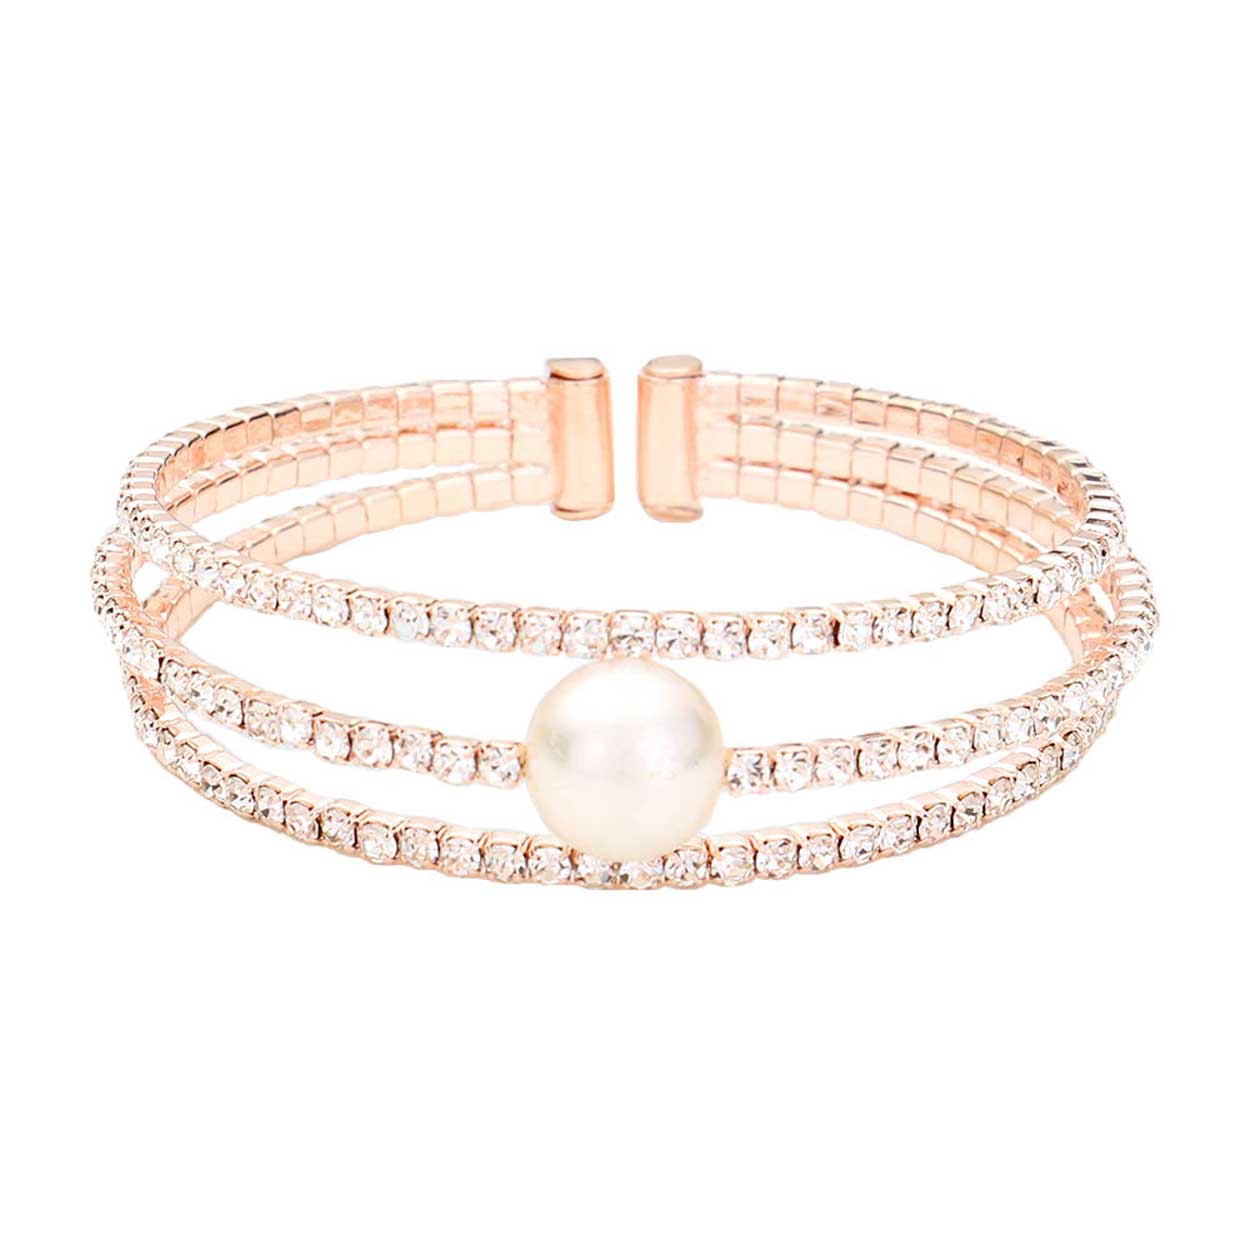 Rose Gold Pearl Accented Split Rhinestone Evening Cuff Bracelet. These gorgeous rhinestone pieces will show your class in any special occasion. The elegance of these rhinestone goes unmatched, great for wearing at a party! Perfect jewelry to enhance your look. Awesome gift for birthday, Anniversary, Valentine’s Day or any special occasion.